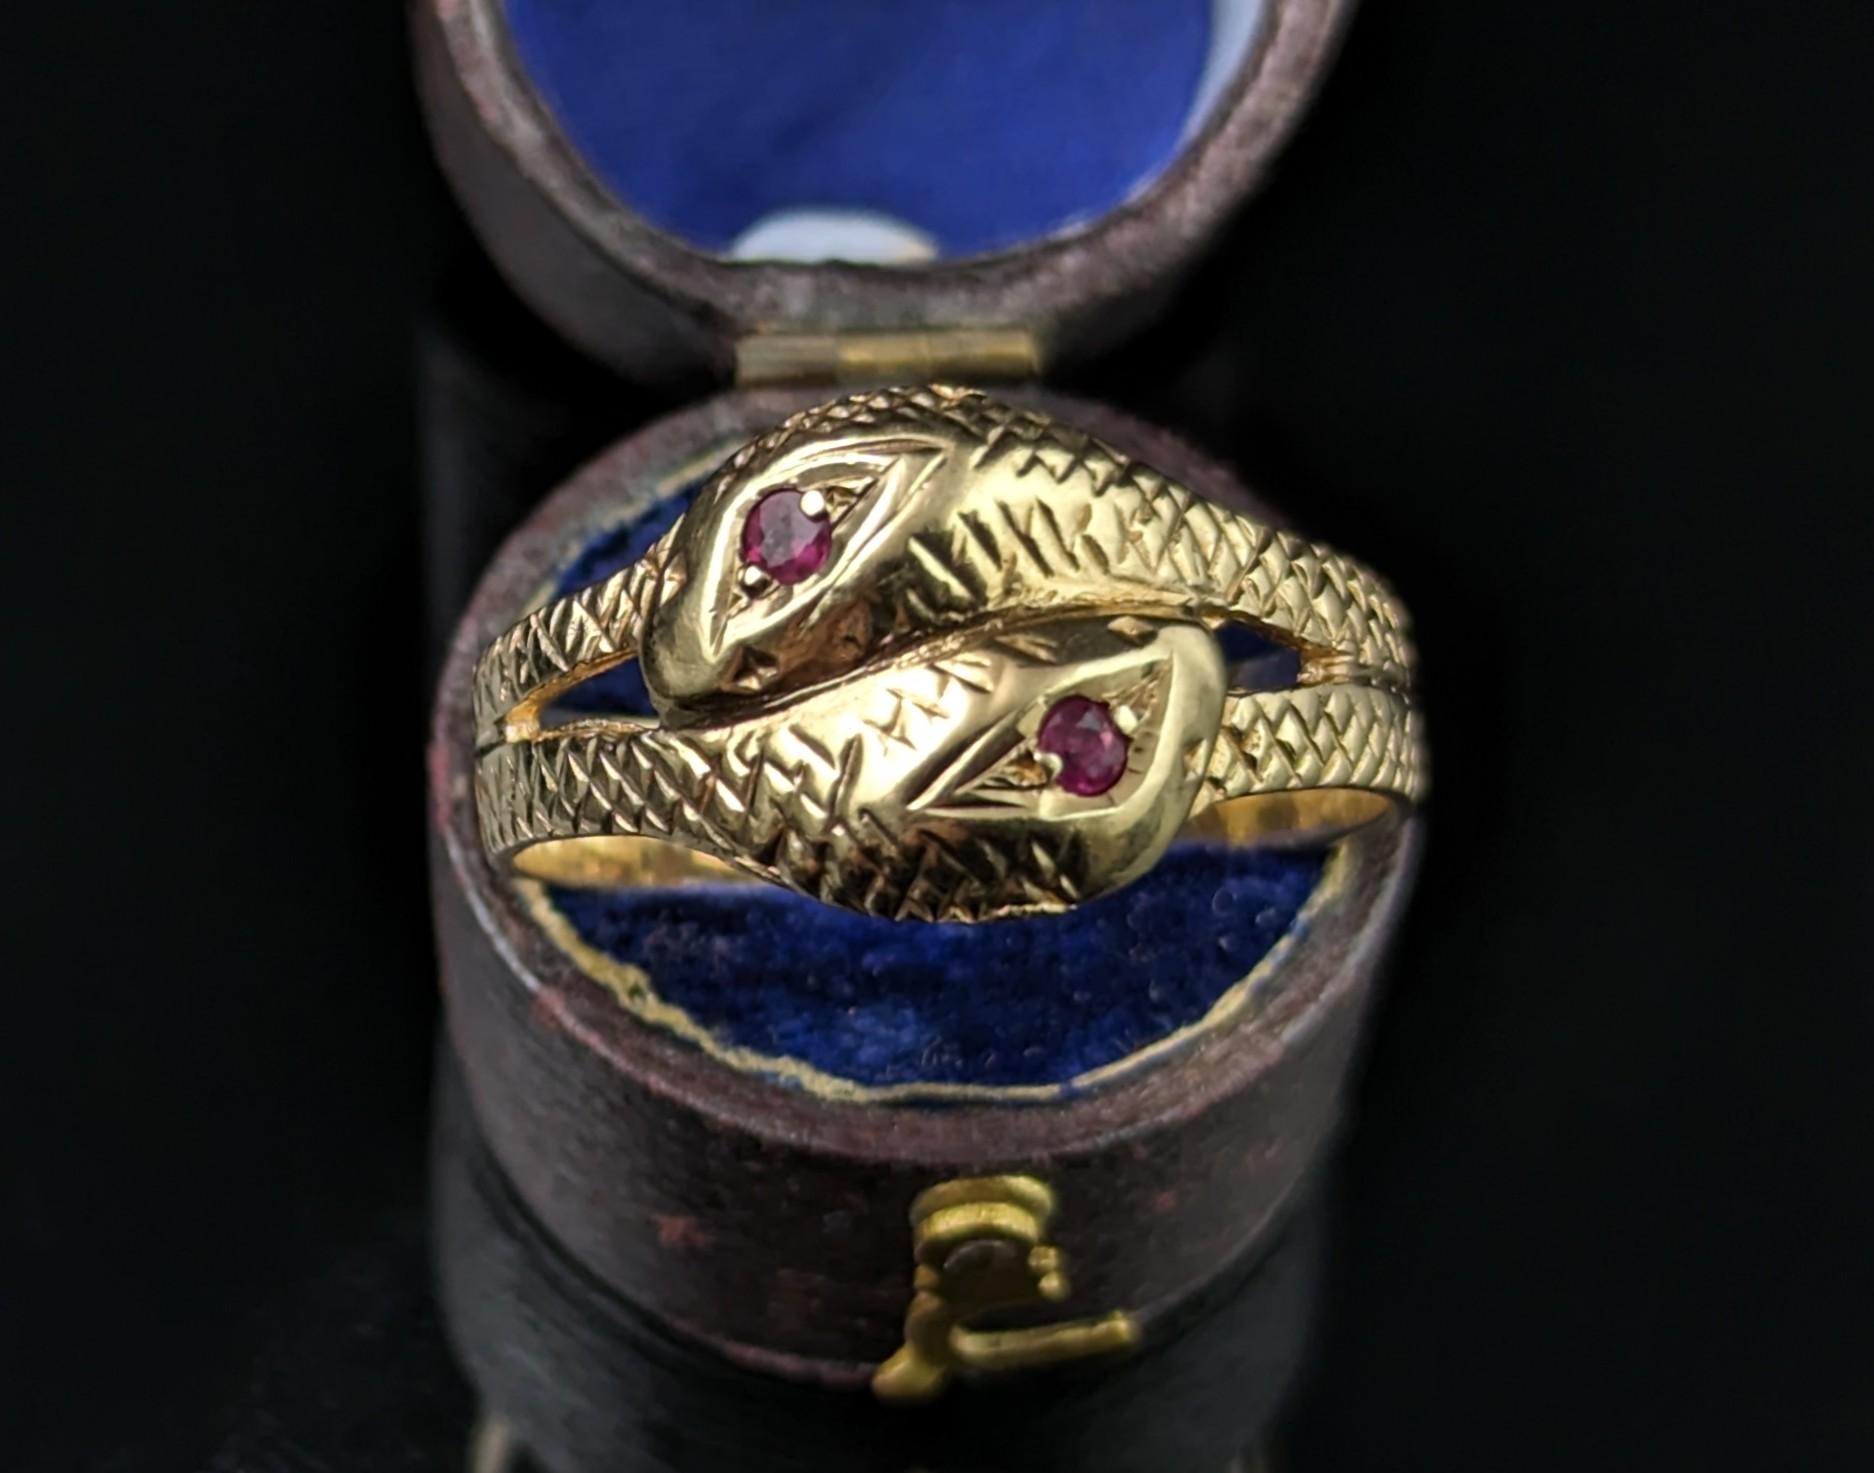 You can't help but be charmed by this awesome vintage double snake ring.

Coils of rich 9ct yellow gold form the body of these handsome intertwined snake friends, the heads are modelled at the face of the ring with the snakes both having ruby set